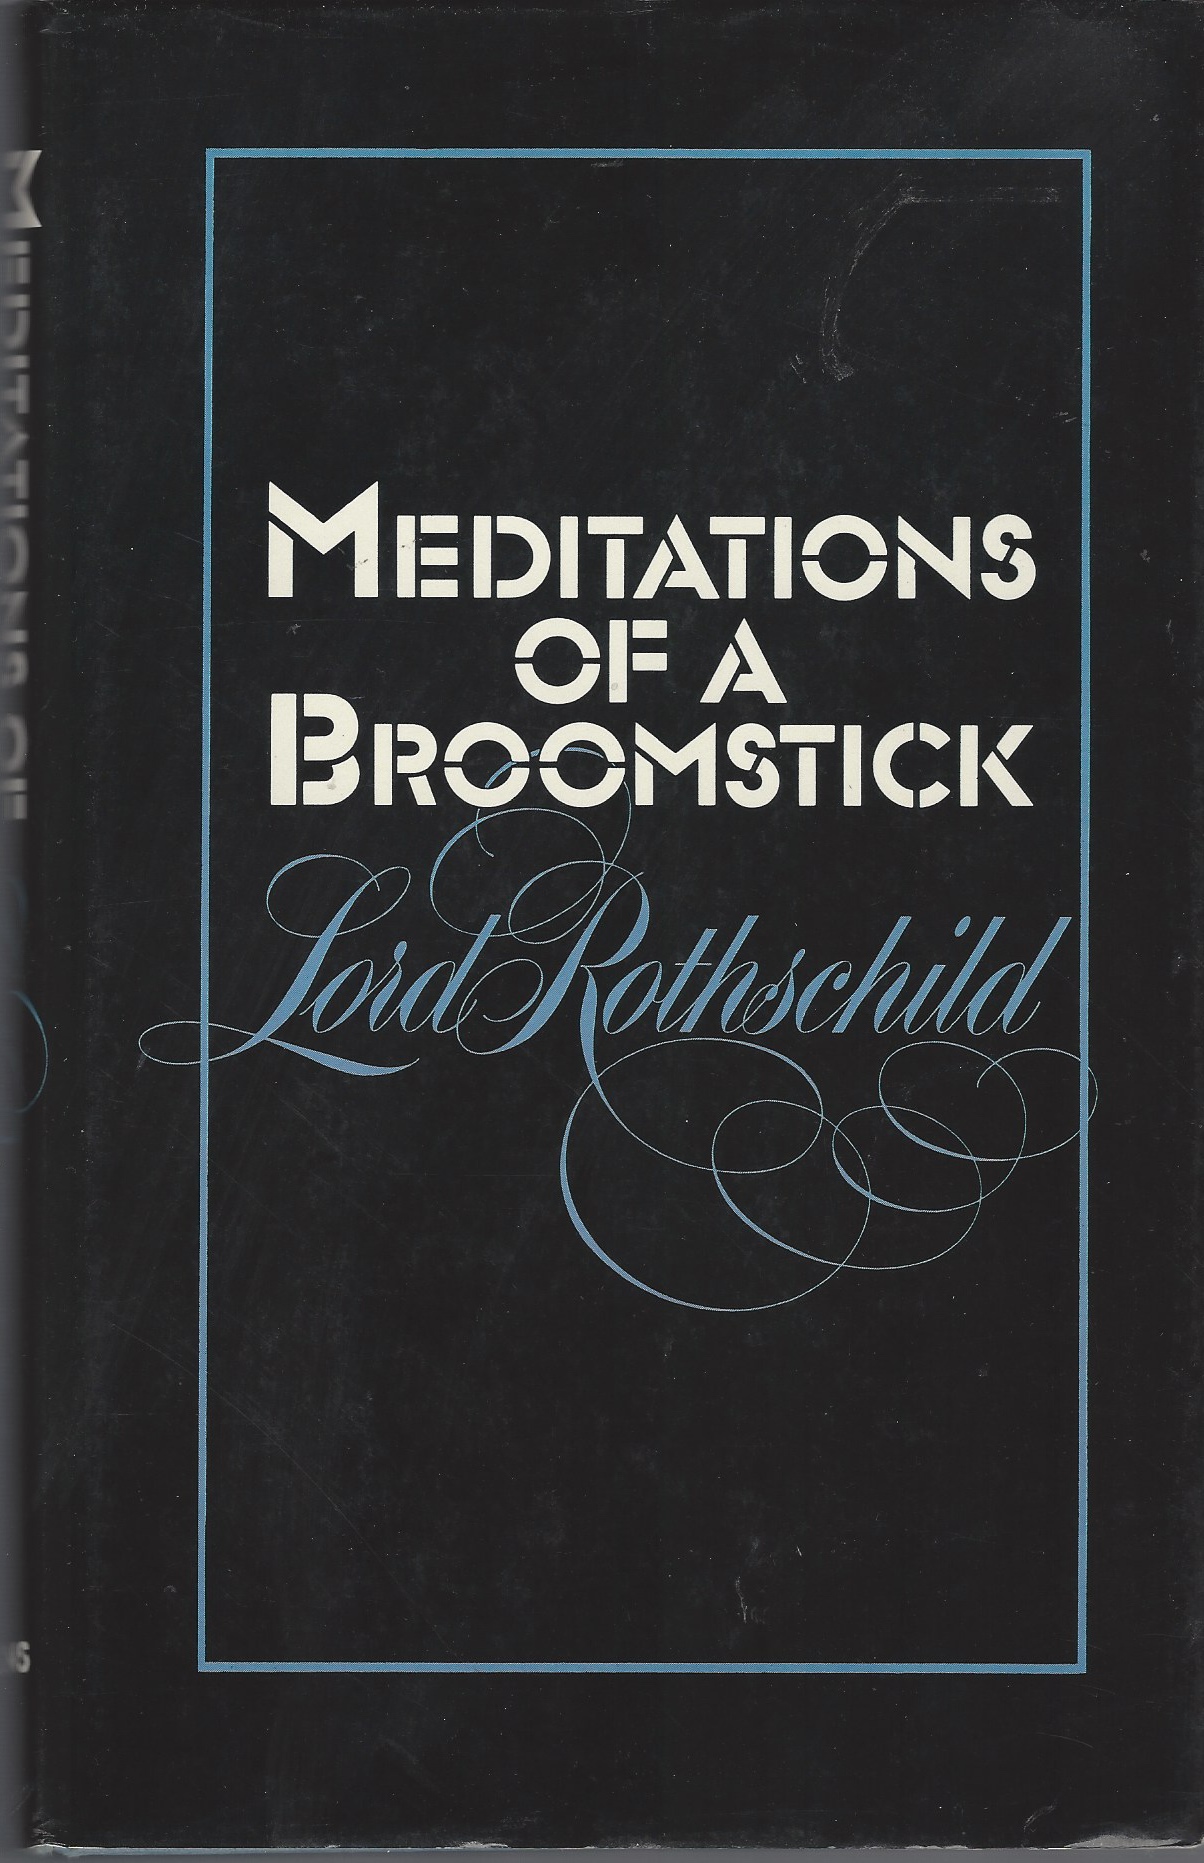 ROTHSCHILD, LORD - Meditations of a Broomstick